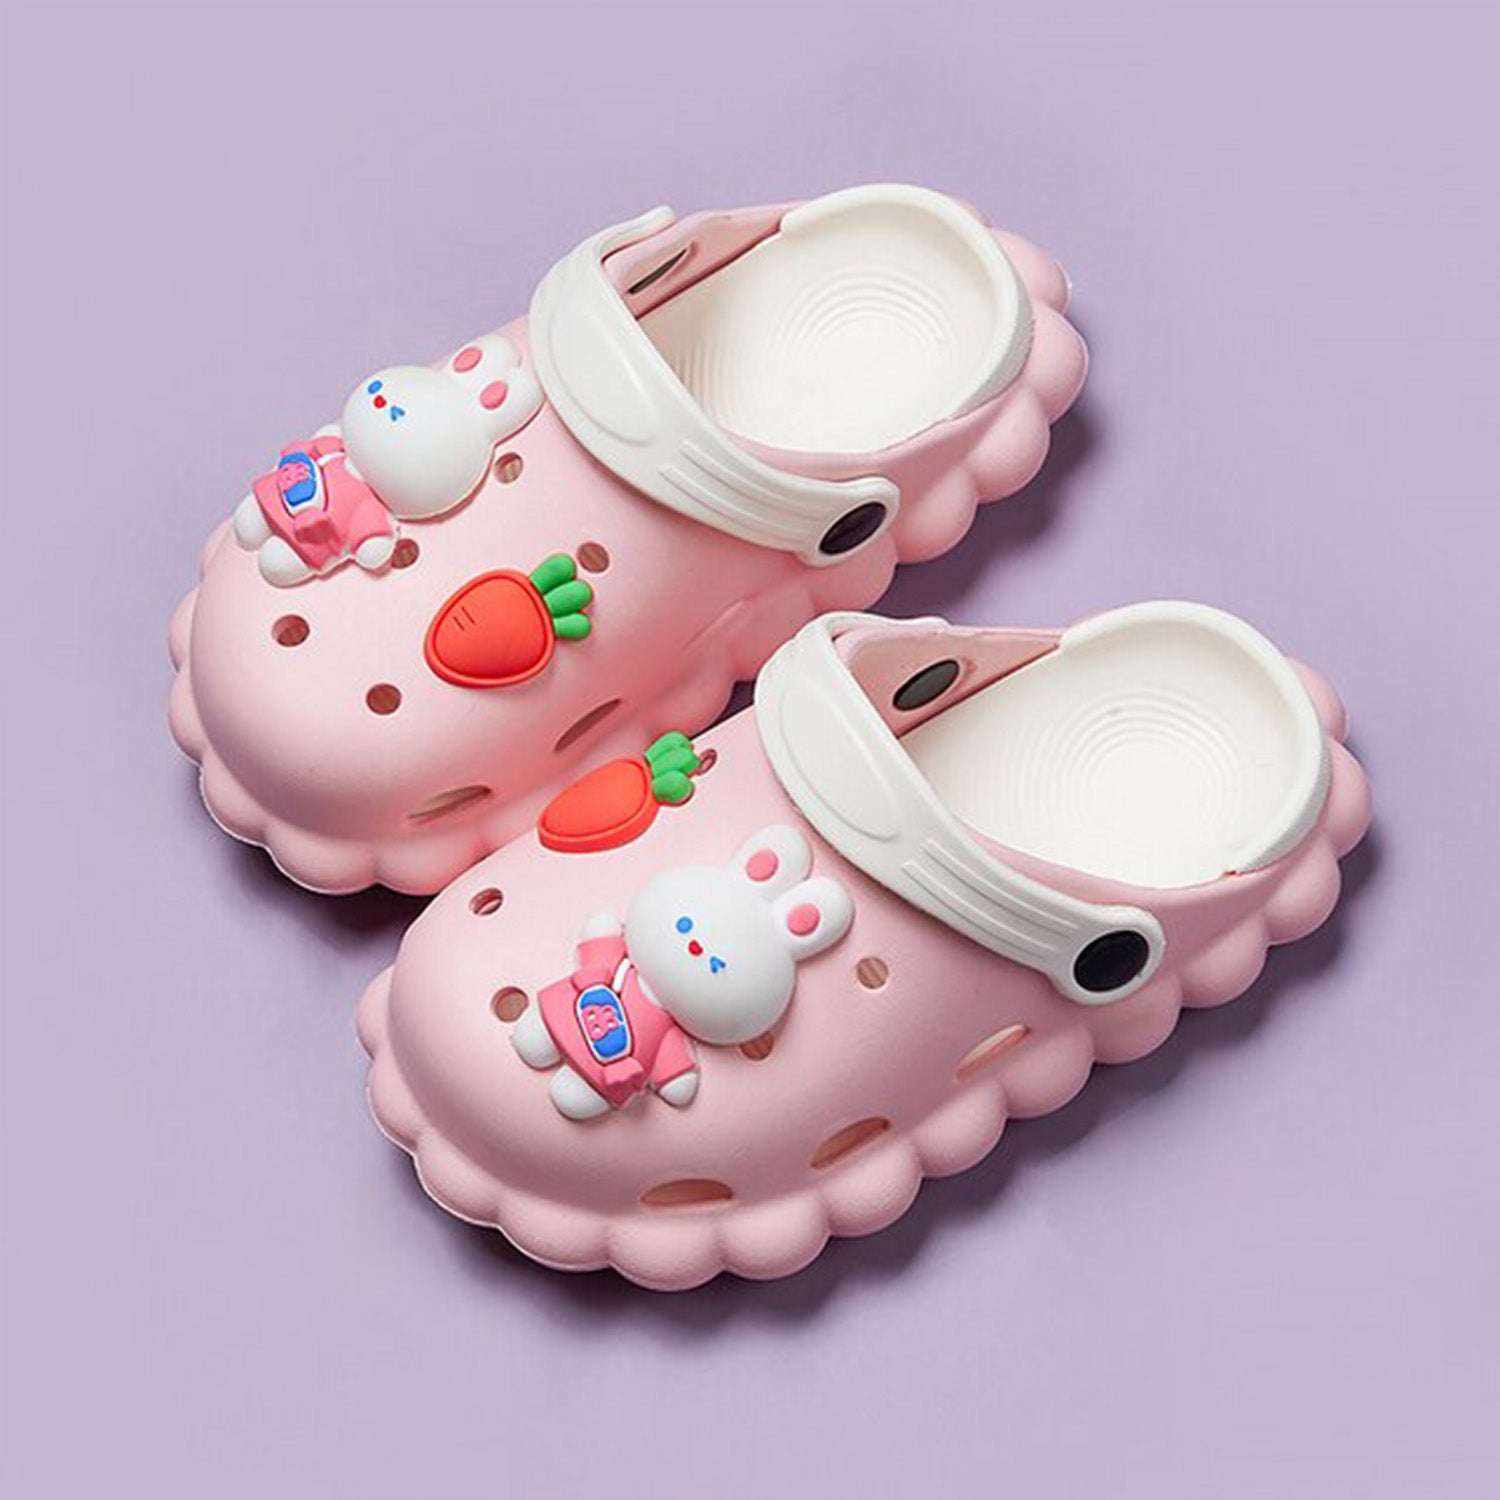 Baby Moo Hungry Bunny Applique Waterproof Anti-Skid Sling Back Clogs - Pink - Baby Moo